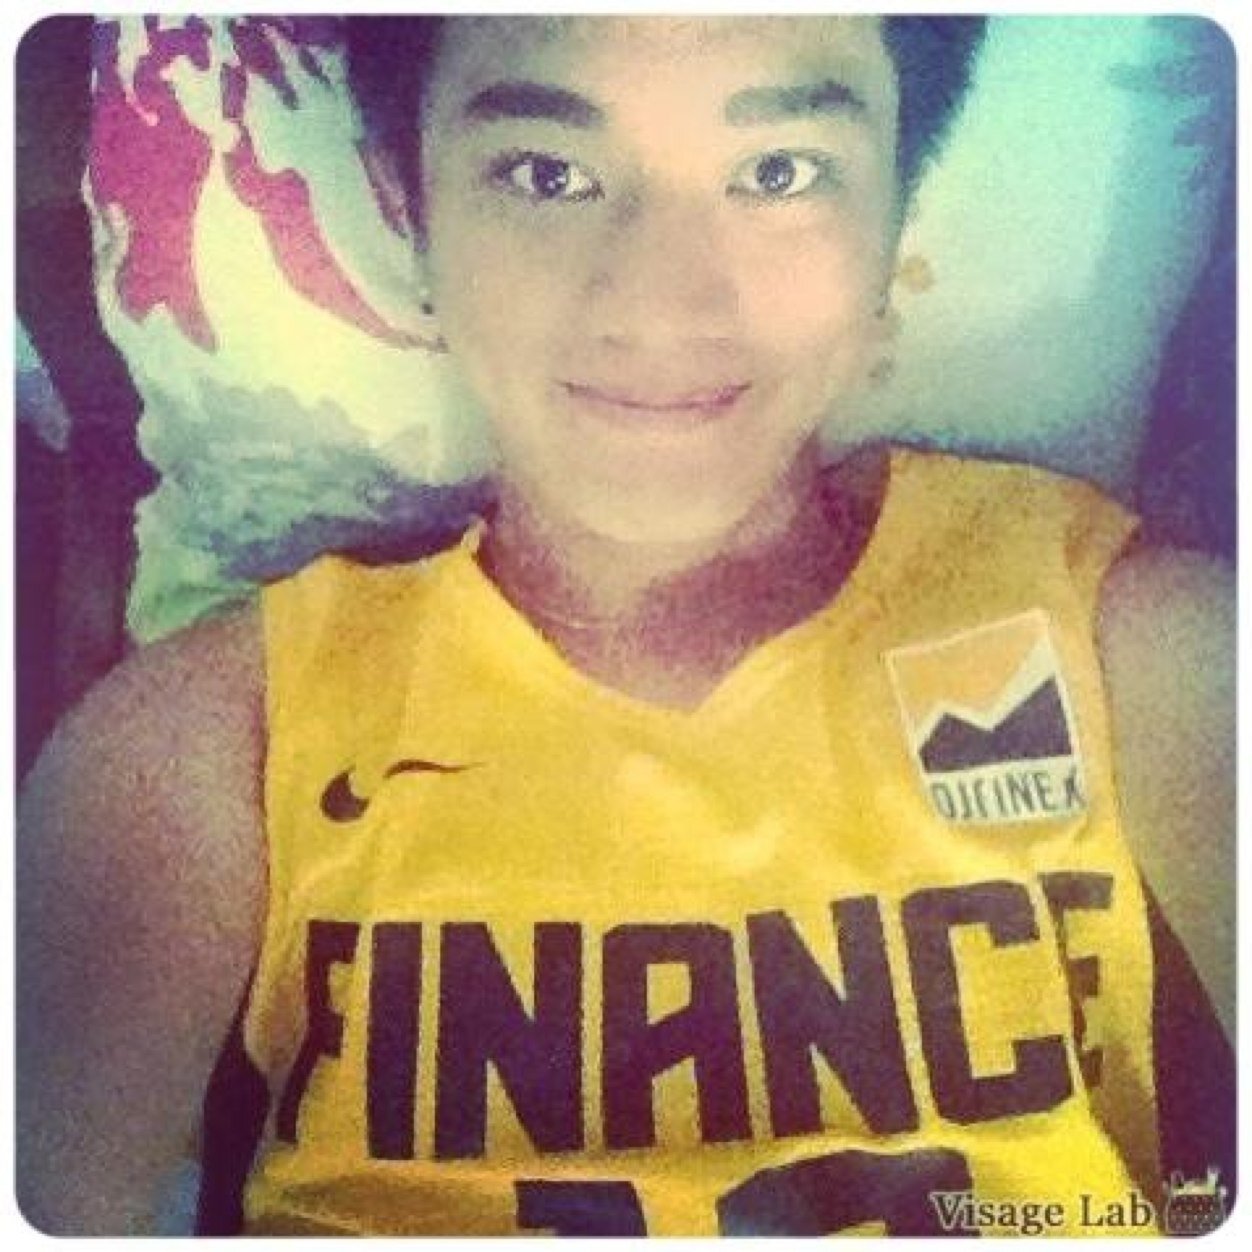 Everything happens for a reason. 18 y/o FEU. http://t.co/eY8wXOth6f